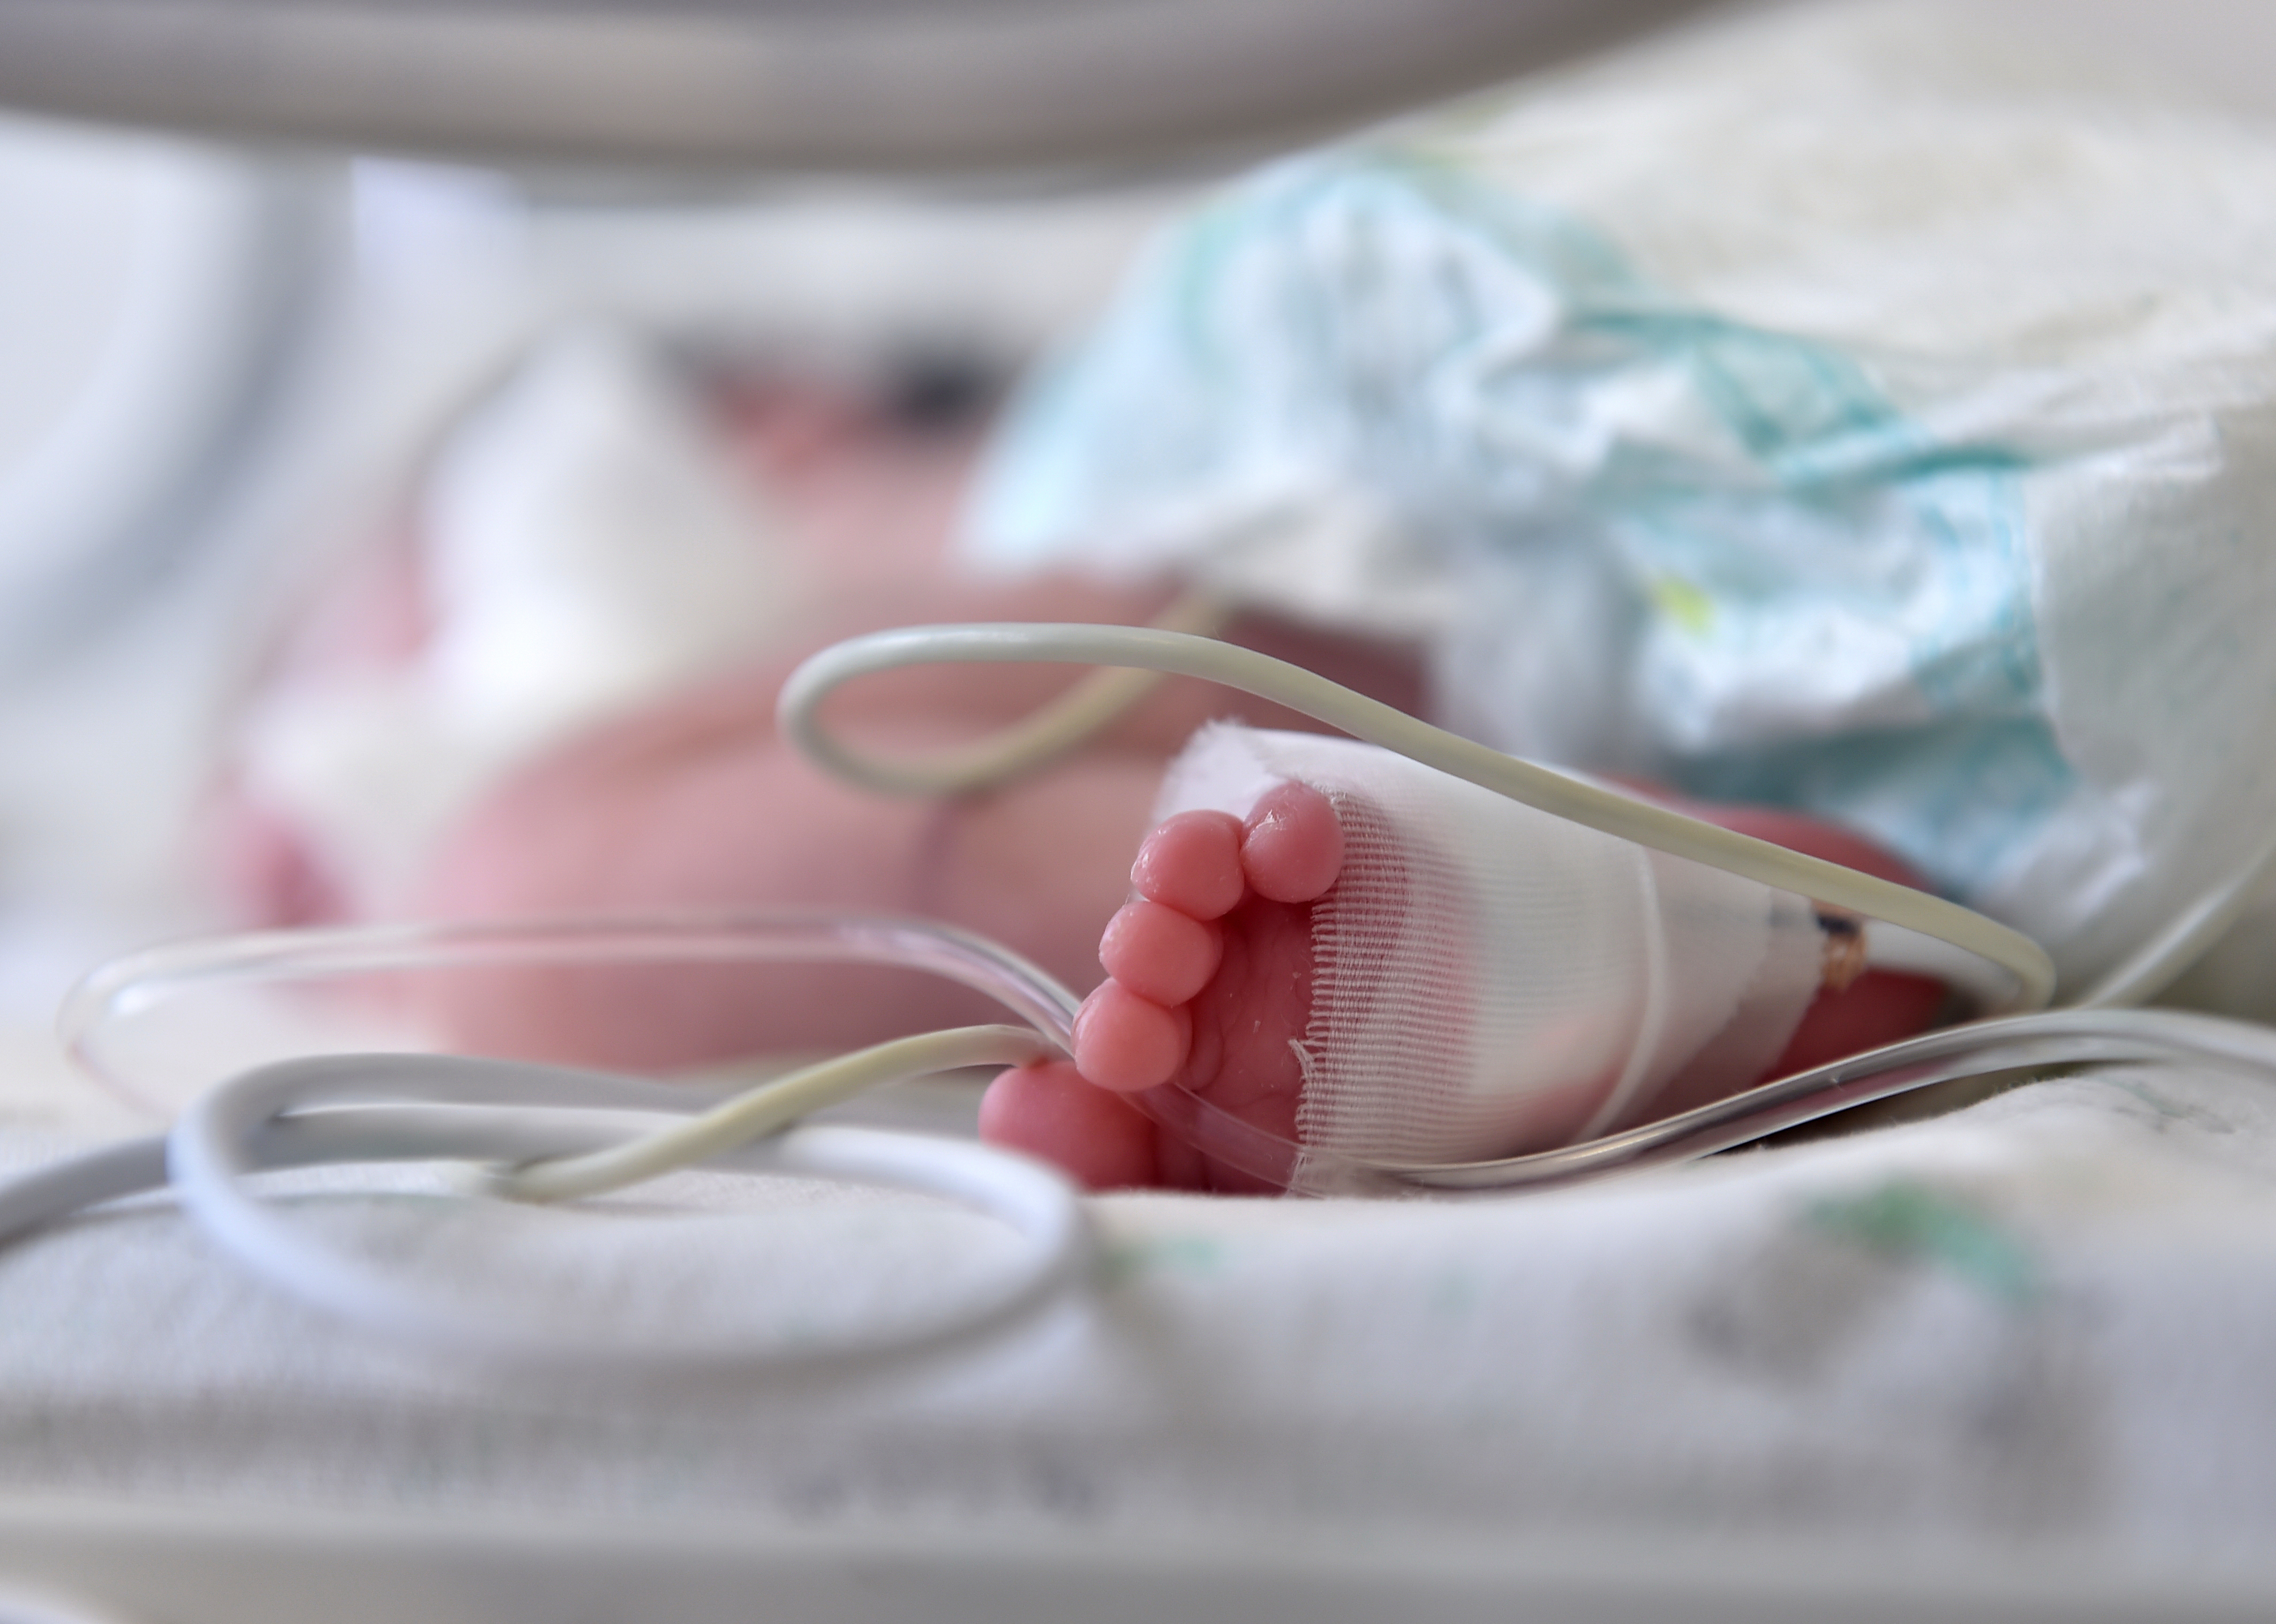 A close-up of a newborn in a hospital, showing the baby&#x27;s small foot with medical tubes, depicting early care in a neonatal intensive care unit (NICU)